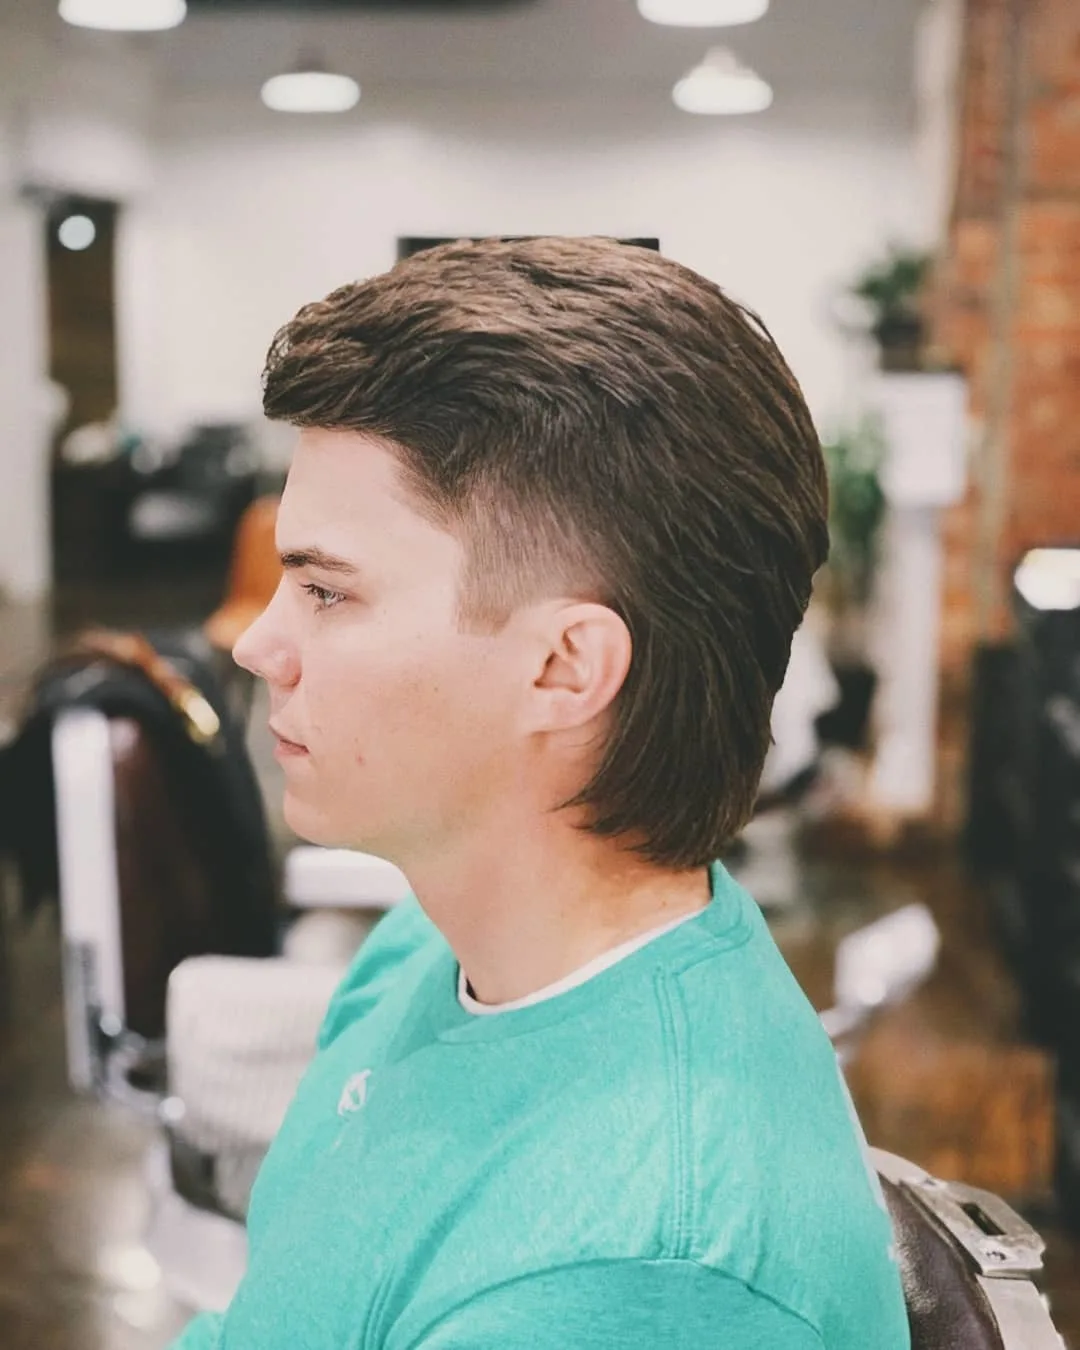 Guy in a green tshirt in a barber shop with a thick and faded mullet haircut